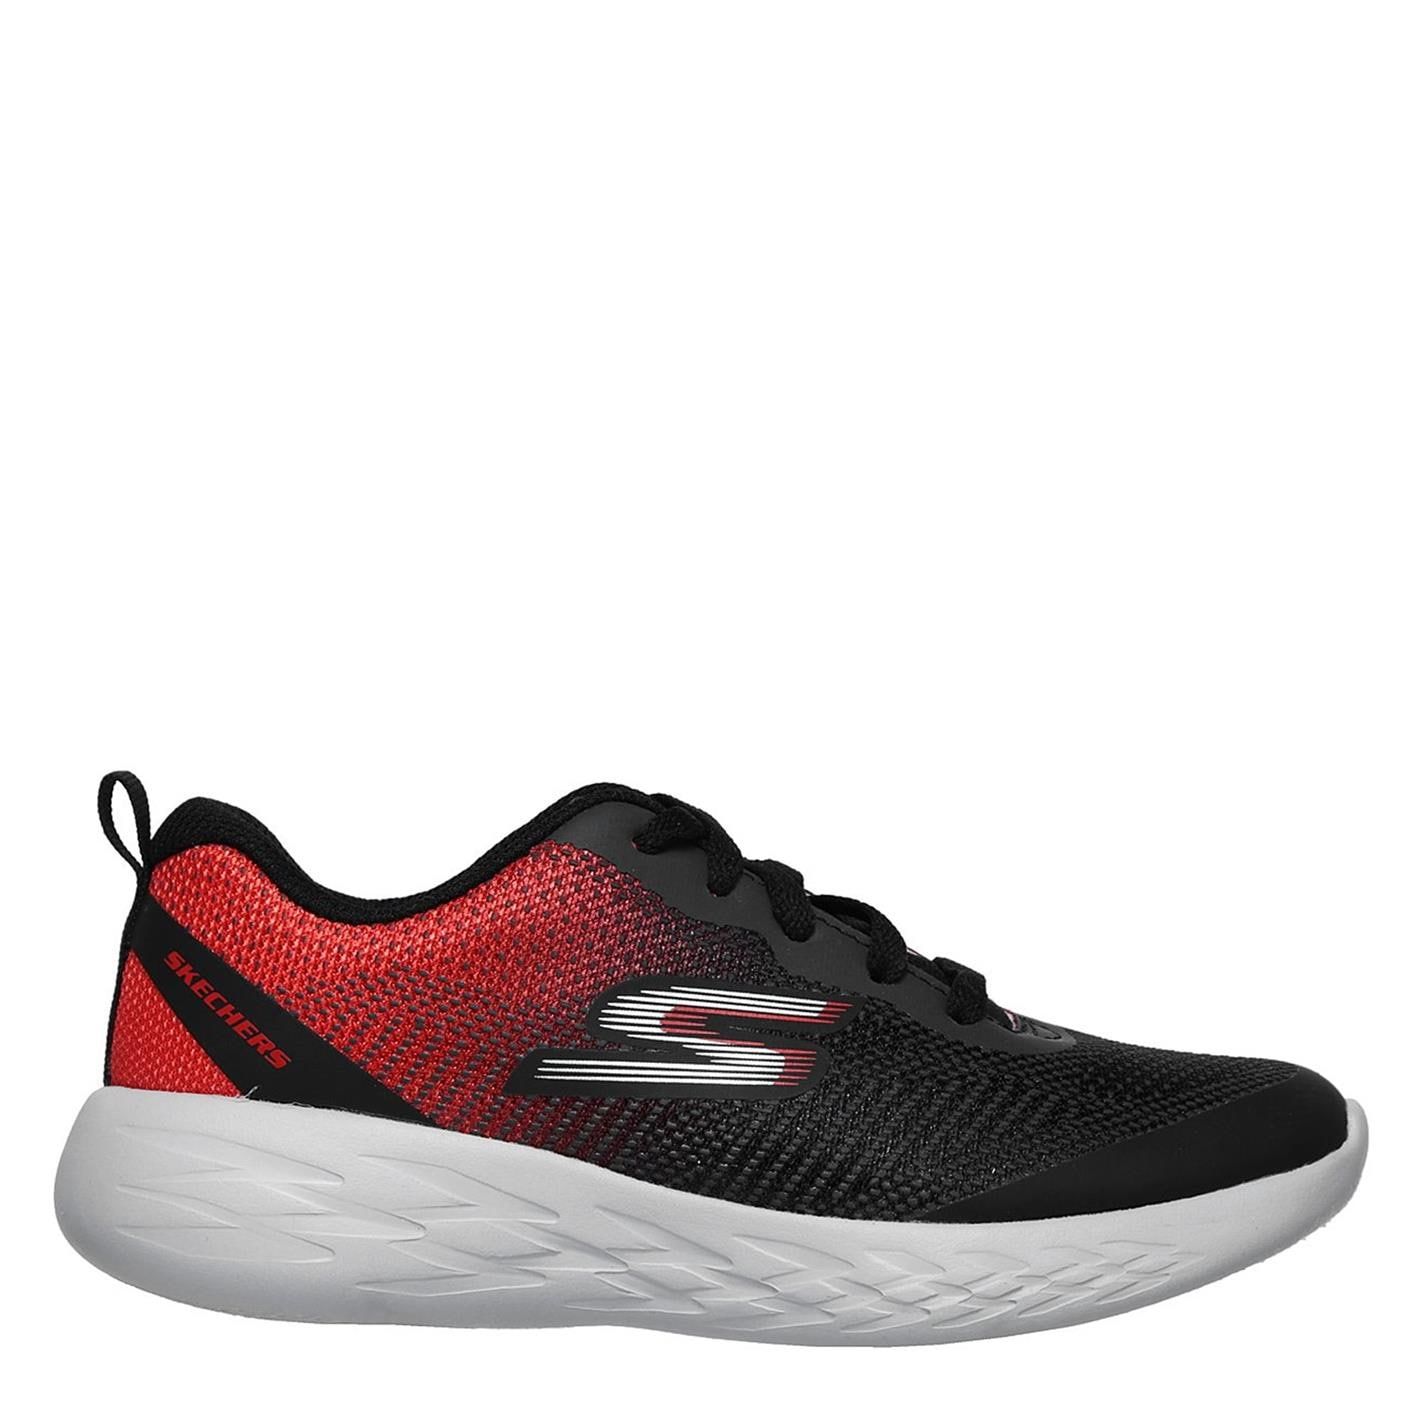 Skechers GoRun 600 Junior Trainers - The Skechers GoRun 600 Trainers have been crafted with a knit mesh fabric upper featuring synthetic overlays for added stability.